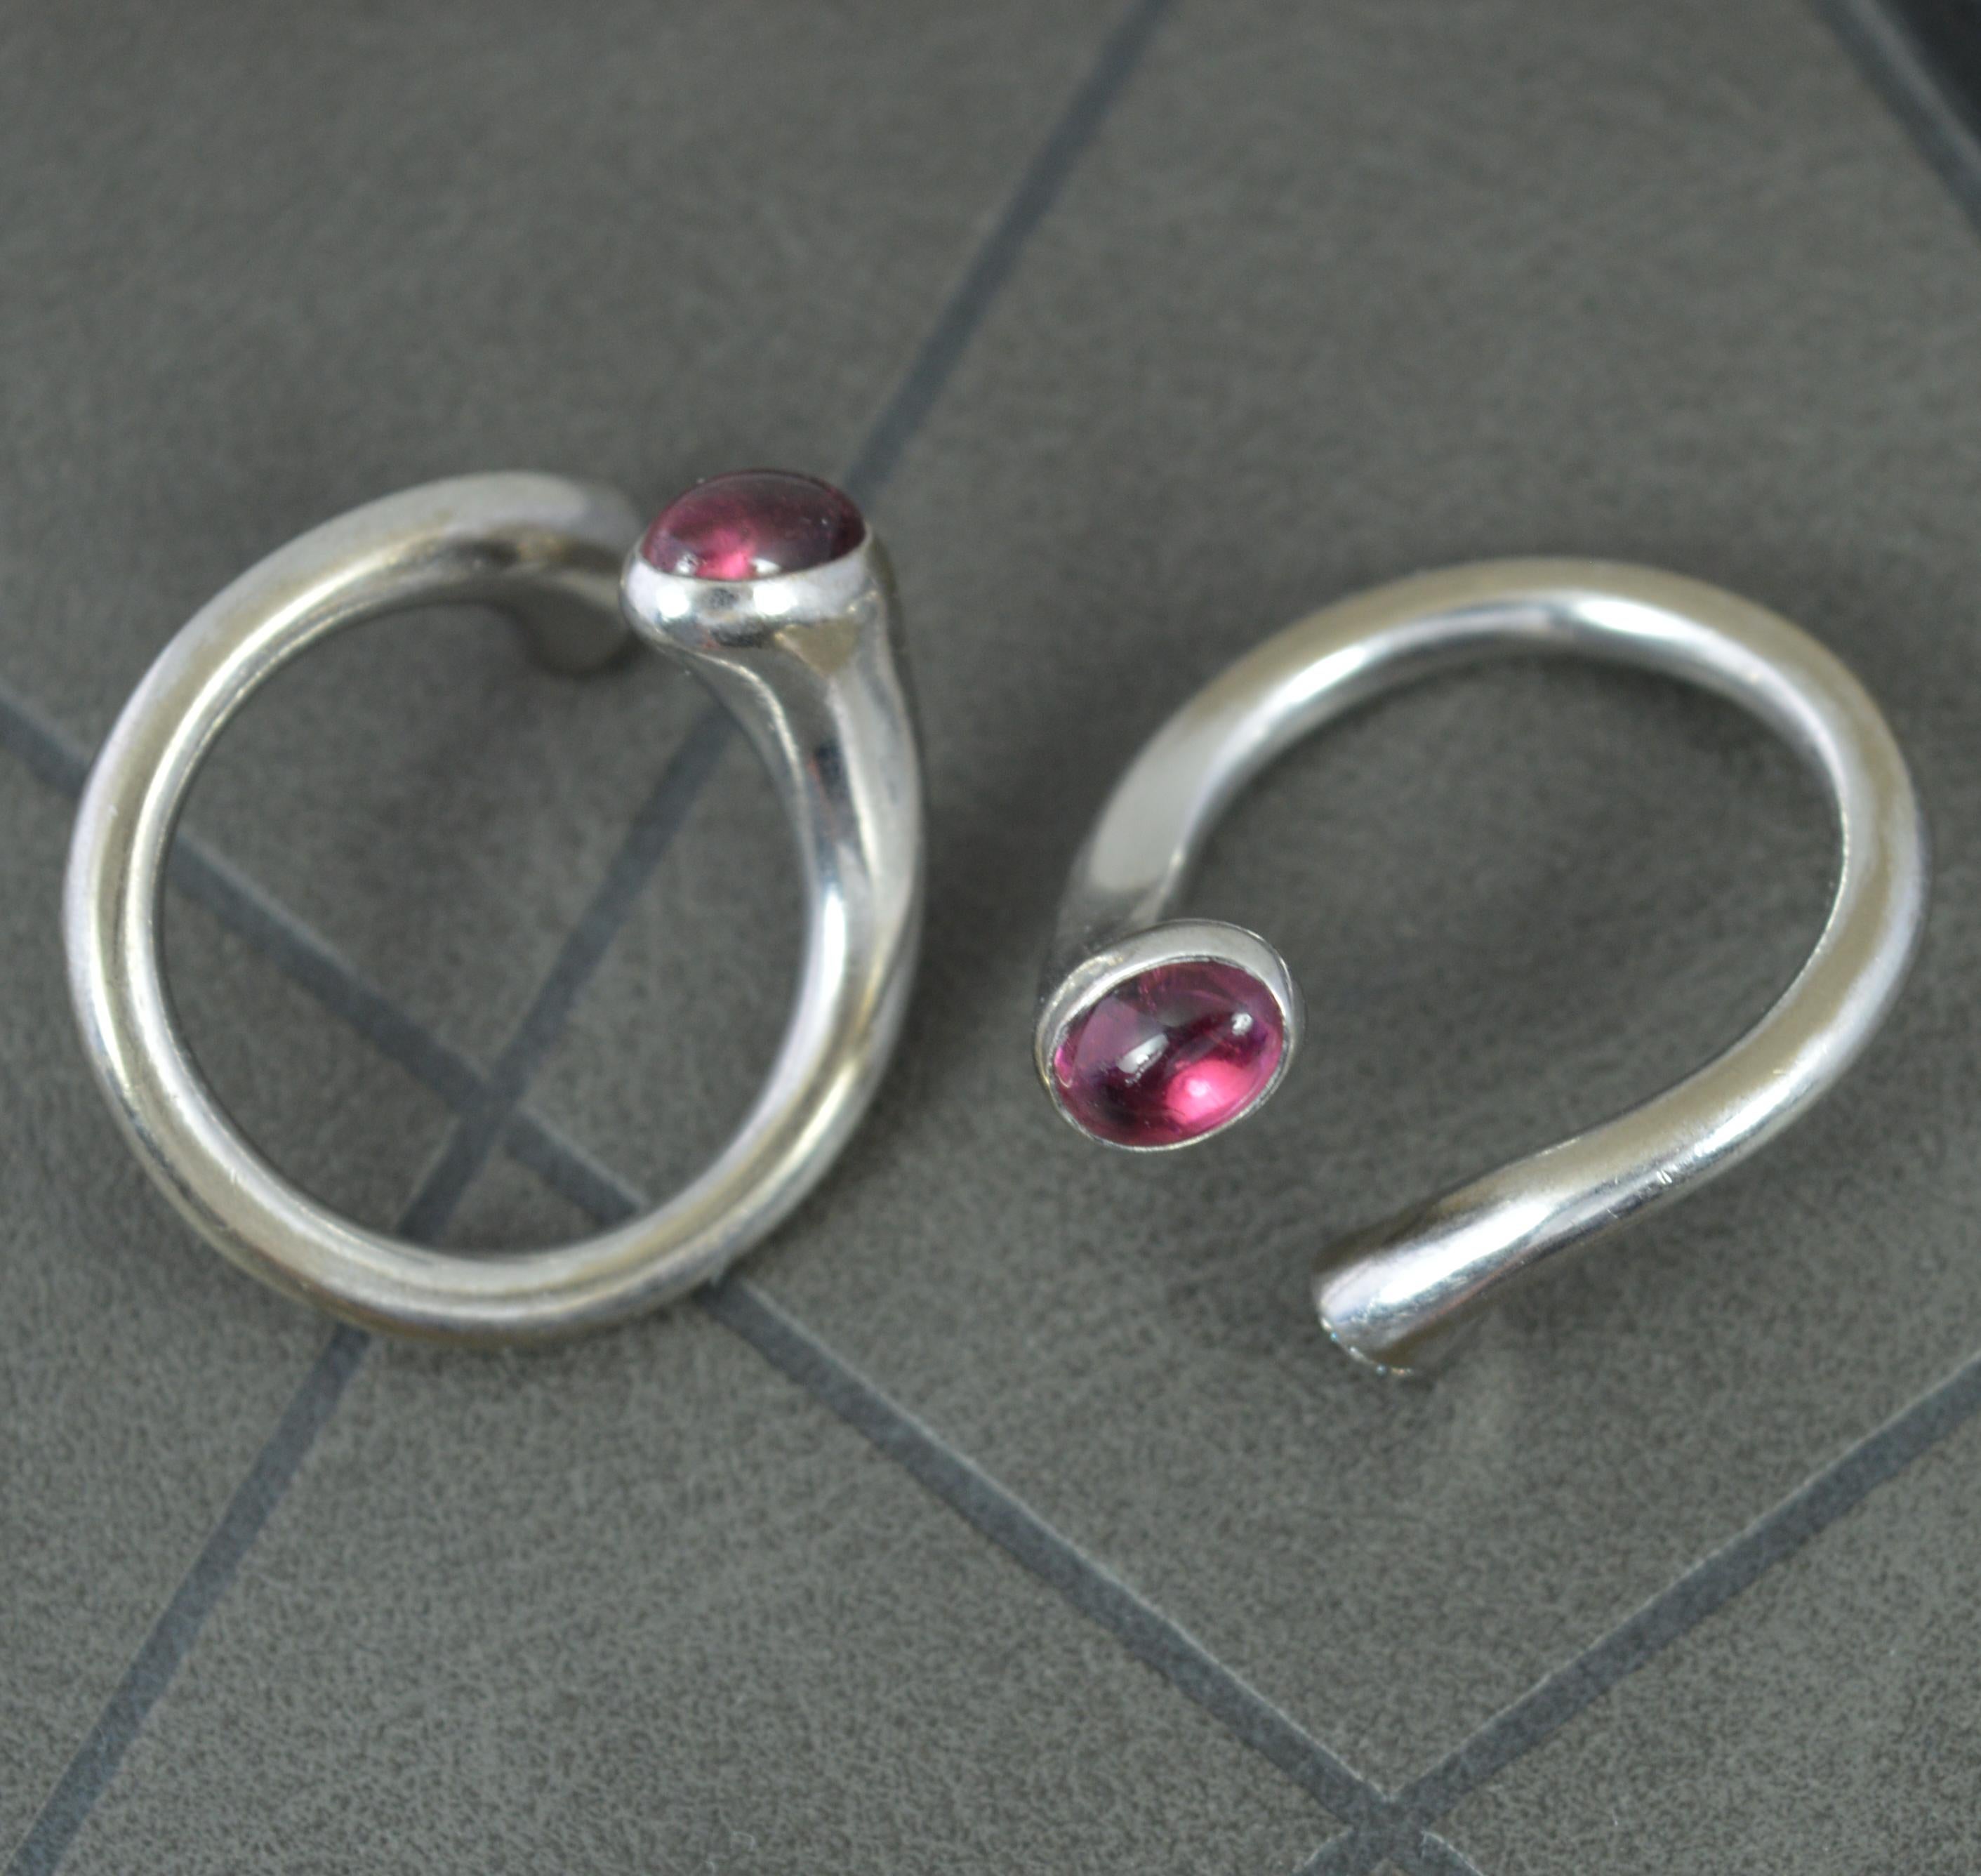 Georg Jensen 18ct White Gold Tourmaline Diamond Torque Rings 1263 Carnival In Good Condition For Sale In St Helens, GB